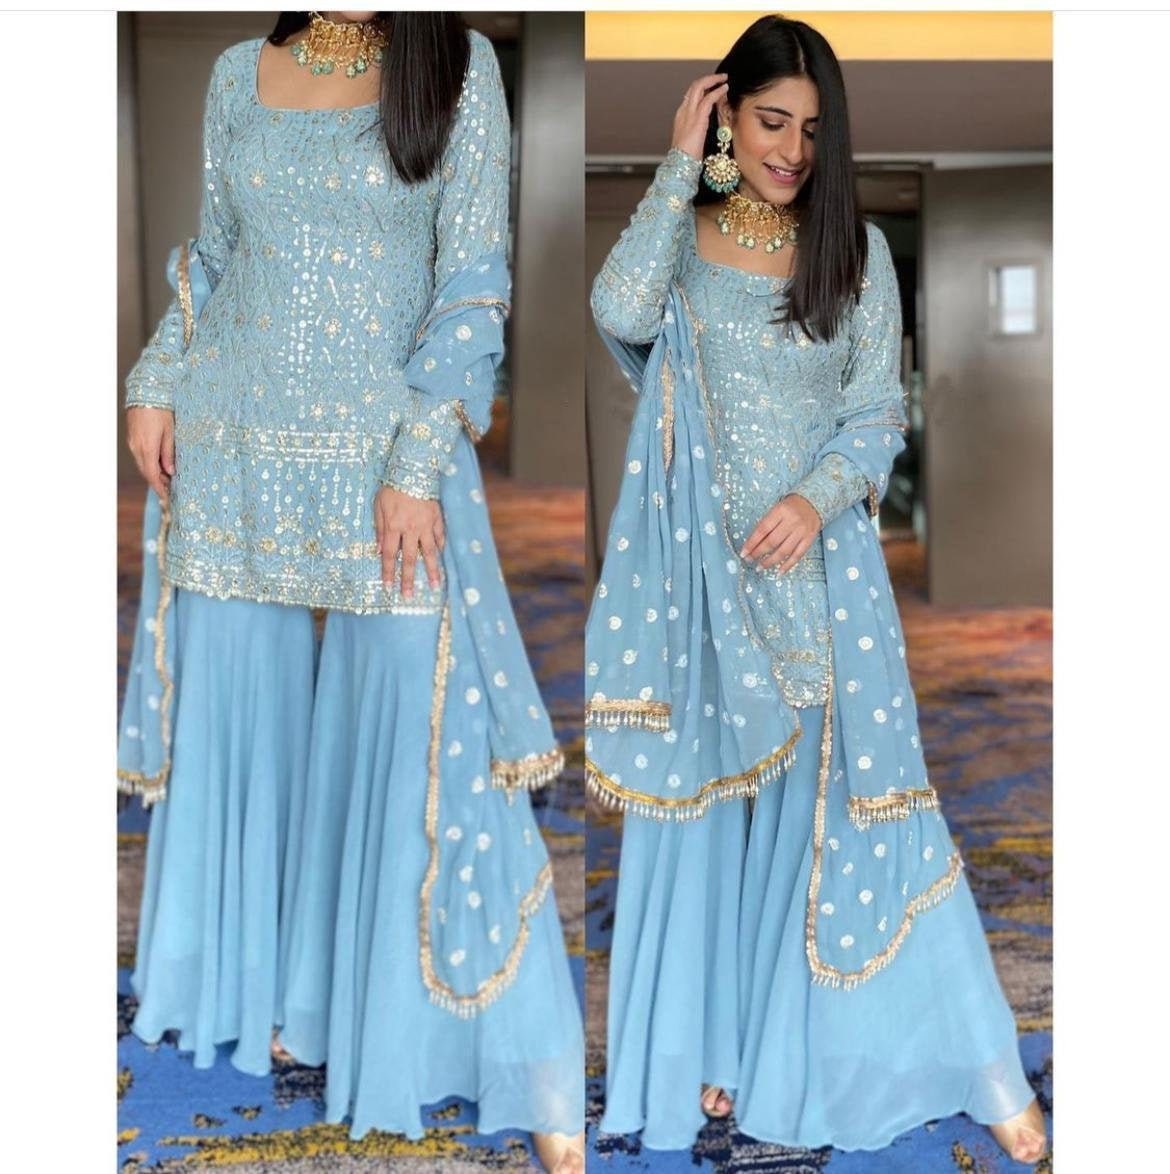 Exclusive Designer Sharara Suits Bollywood Style Embroidery Work Georgette Sharara Suit Pakistani Reception Party Wear Elegant Salwar Suit